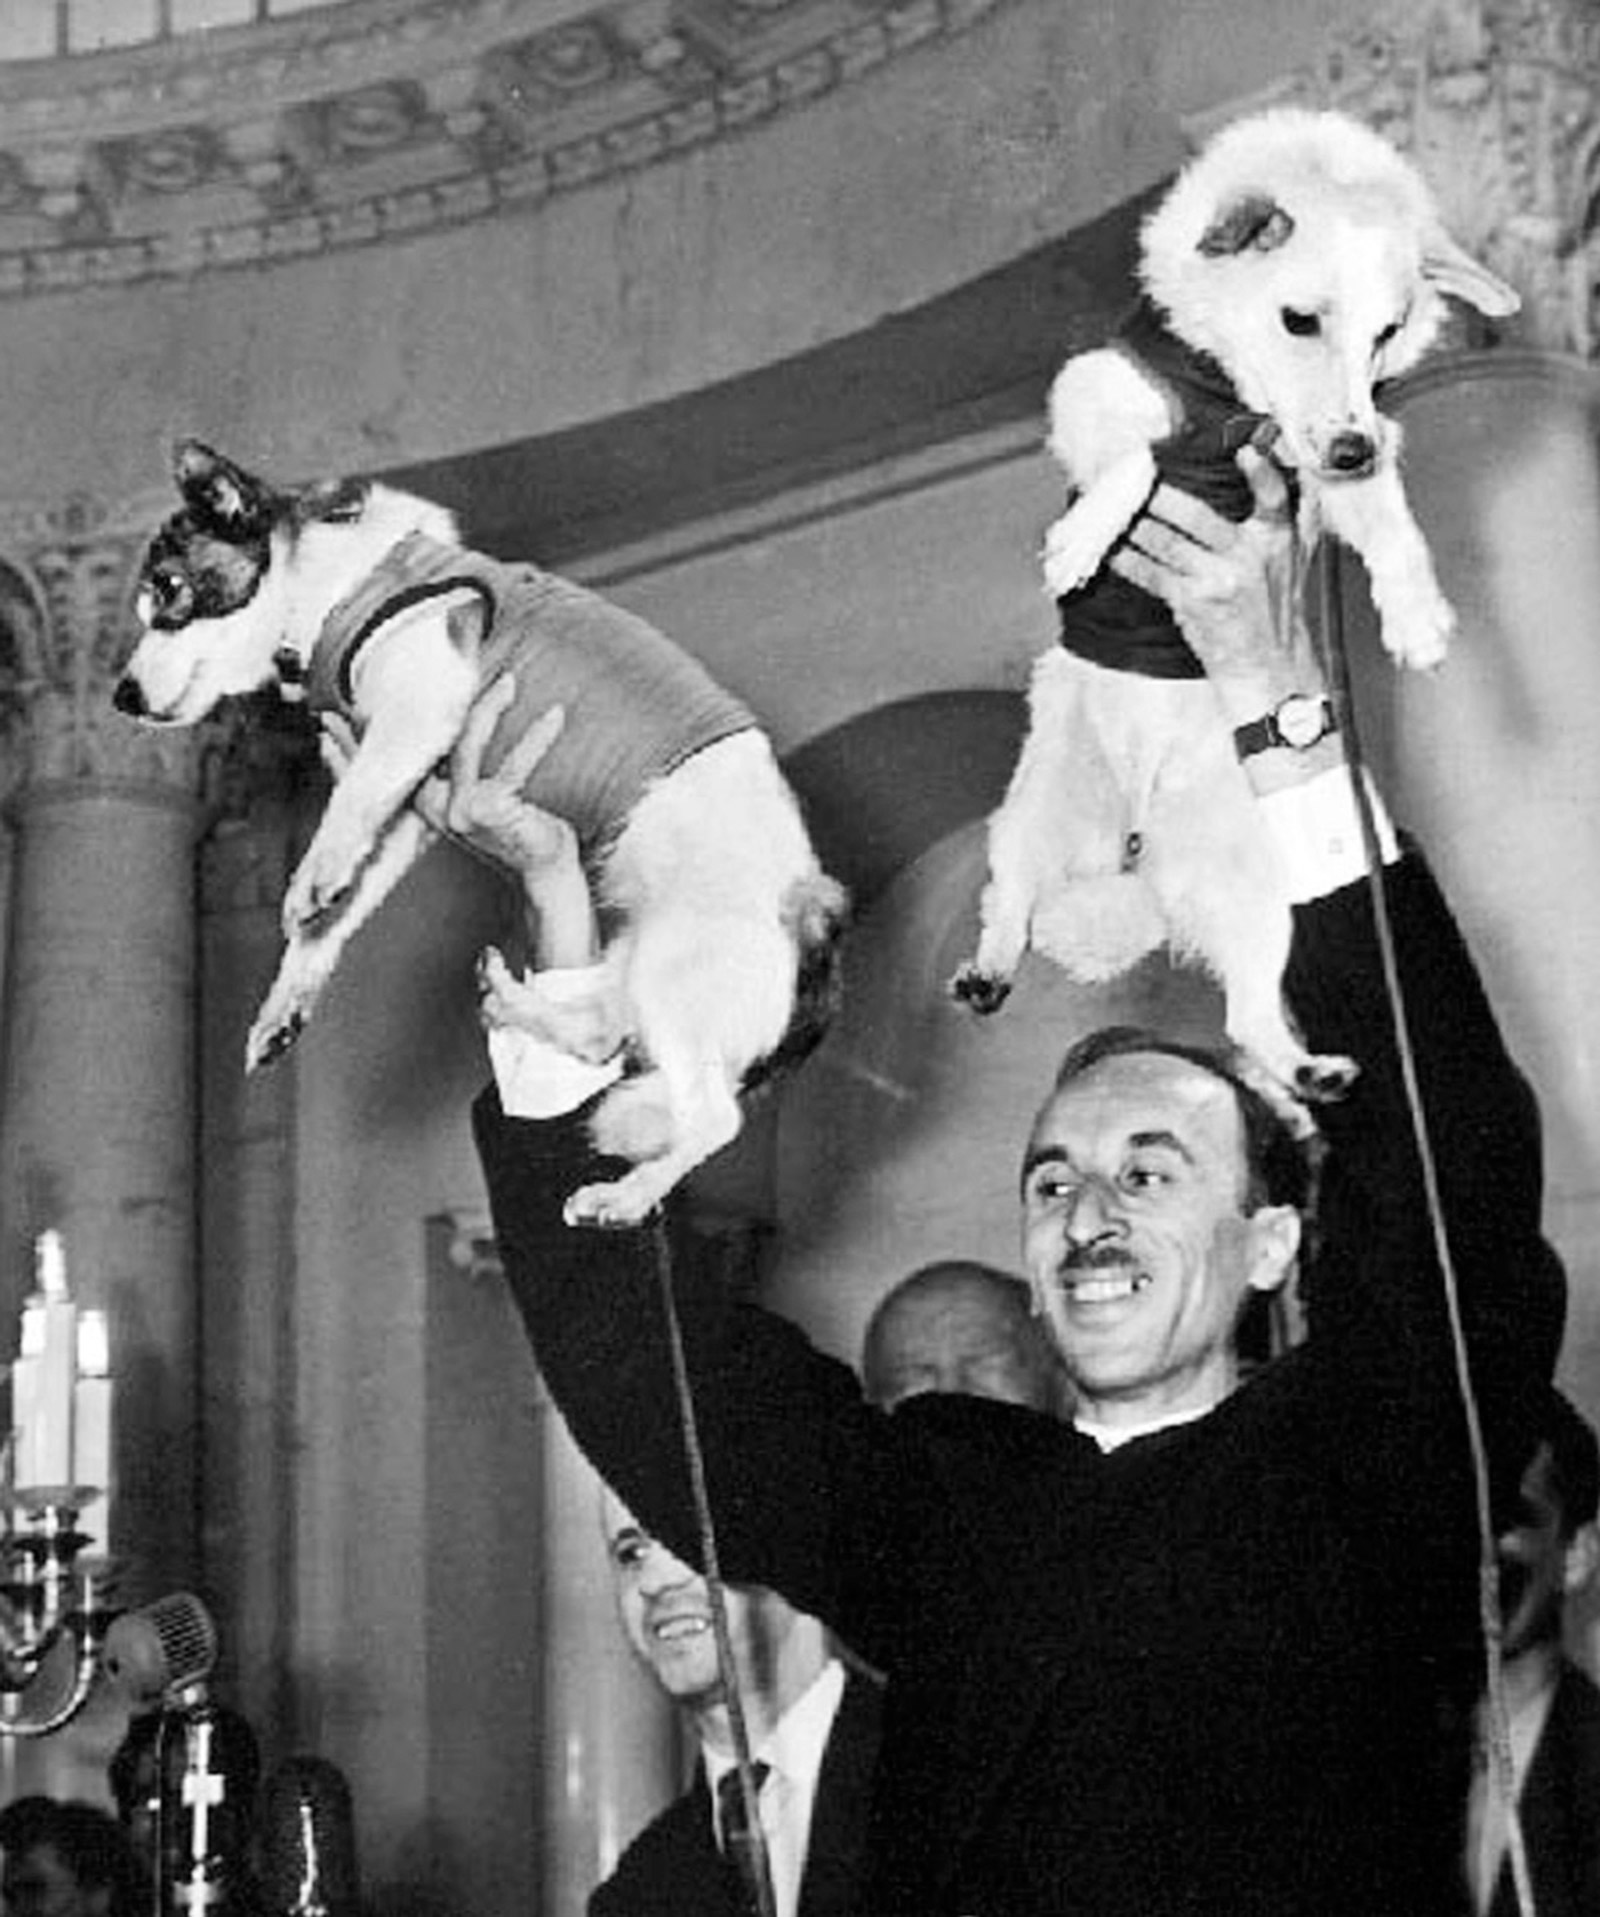 A photograph from the Christ Dubbs collection of Dr. Oleg Gazenko holding dogs Belka and Strelka after their safe recovery from space